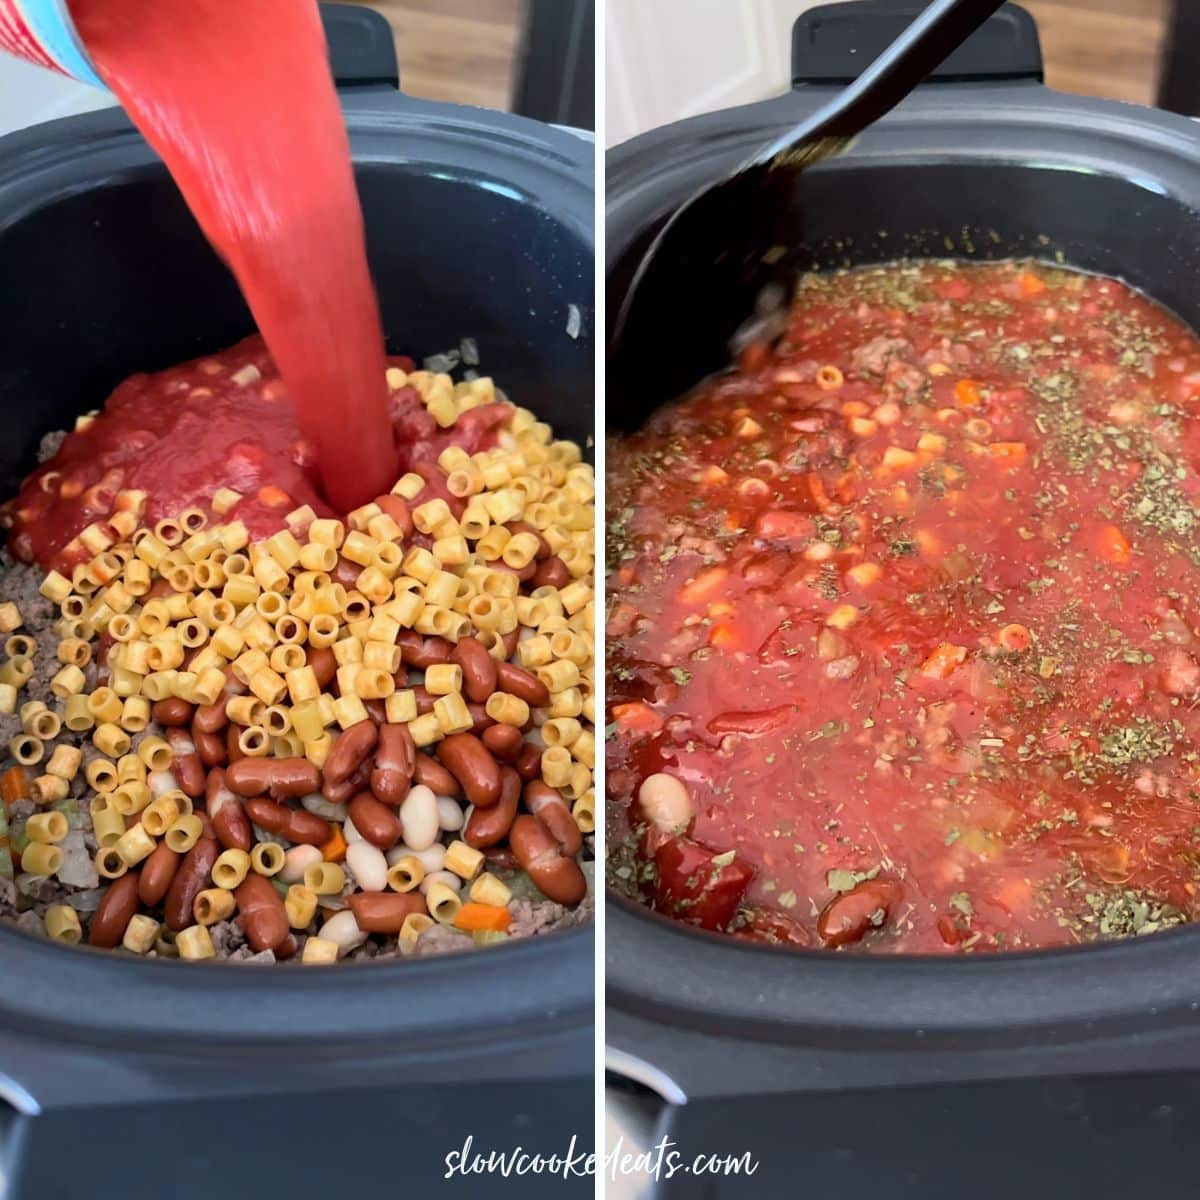 Adding pasta and pasta sauce to the slow cooker.